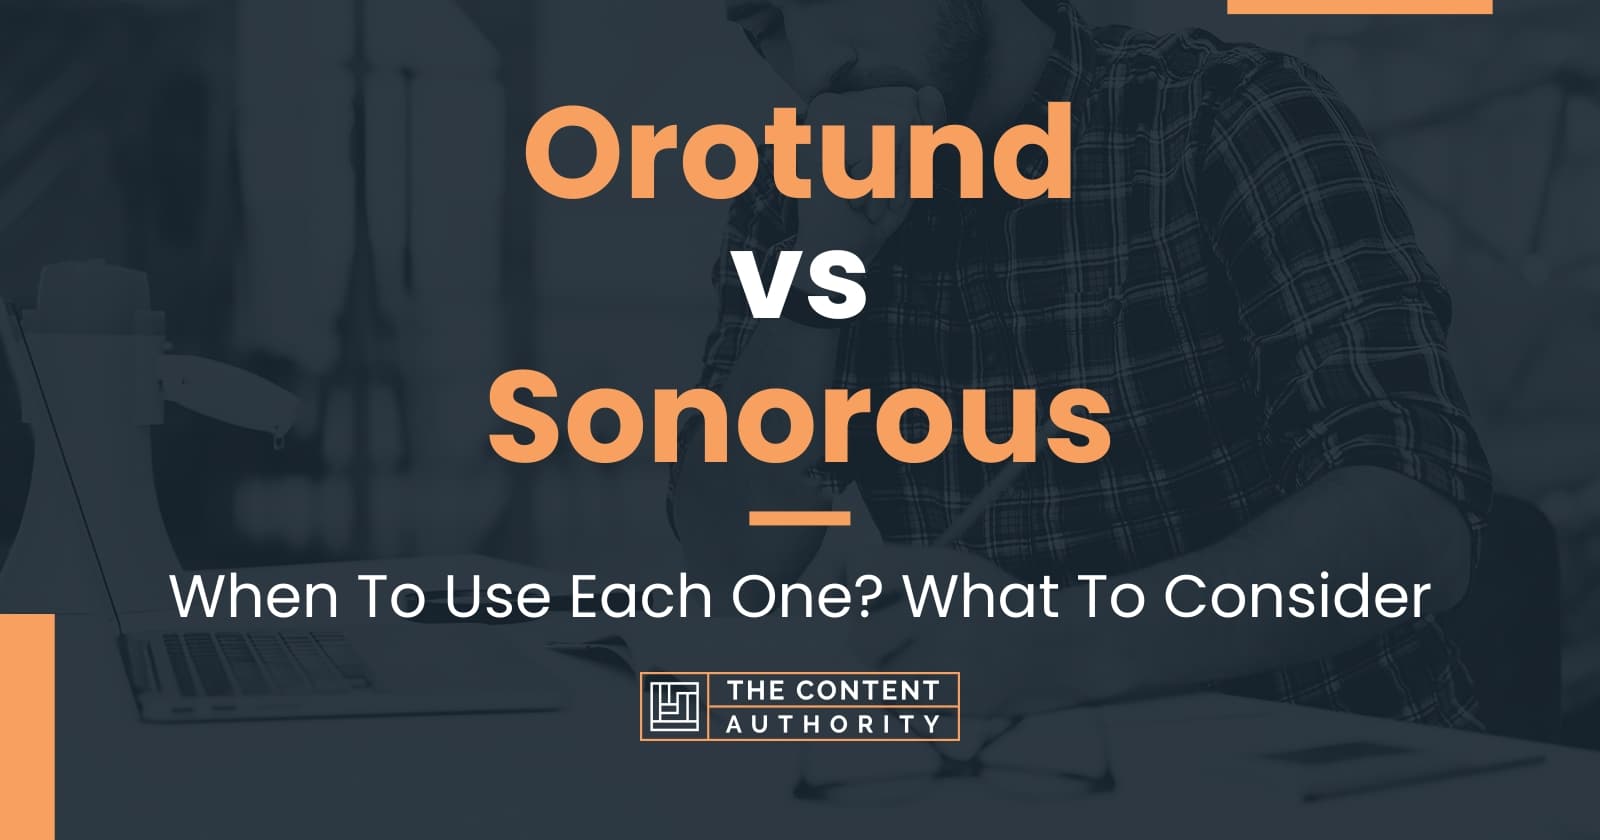 Orotund vs Sonorous: When To Use Each One? What To Consider